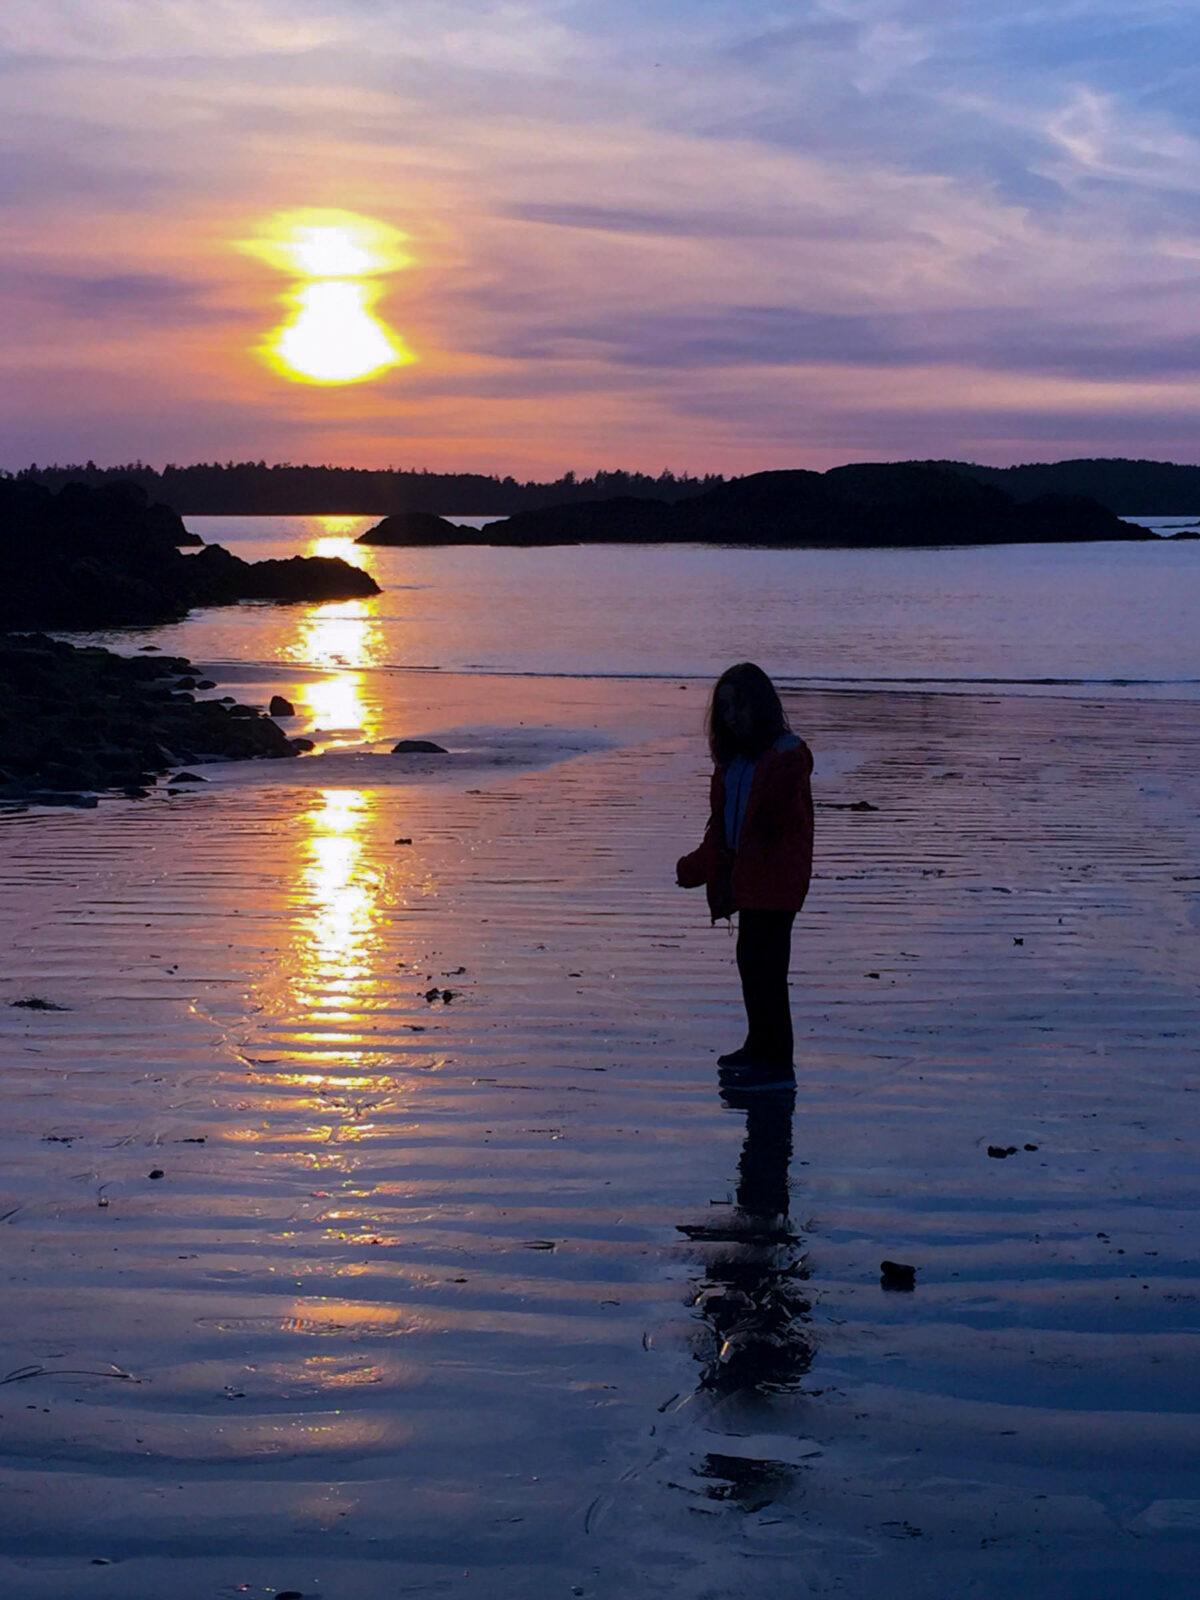 Tofino, the beach at sunset with a silhouette of our daughter. (Courtesy of Michelle Sutter)